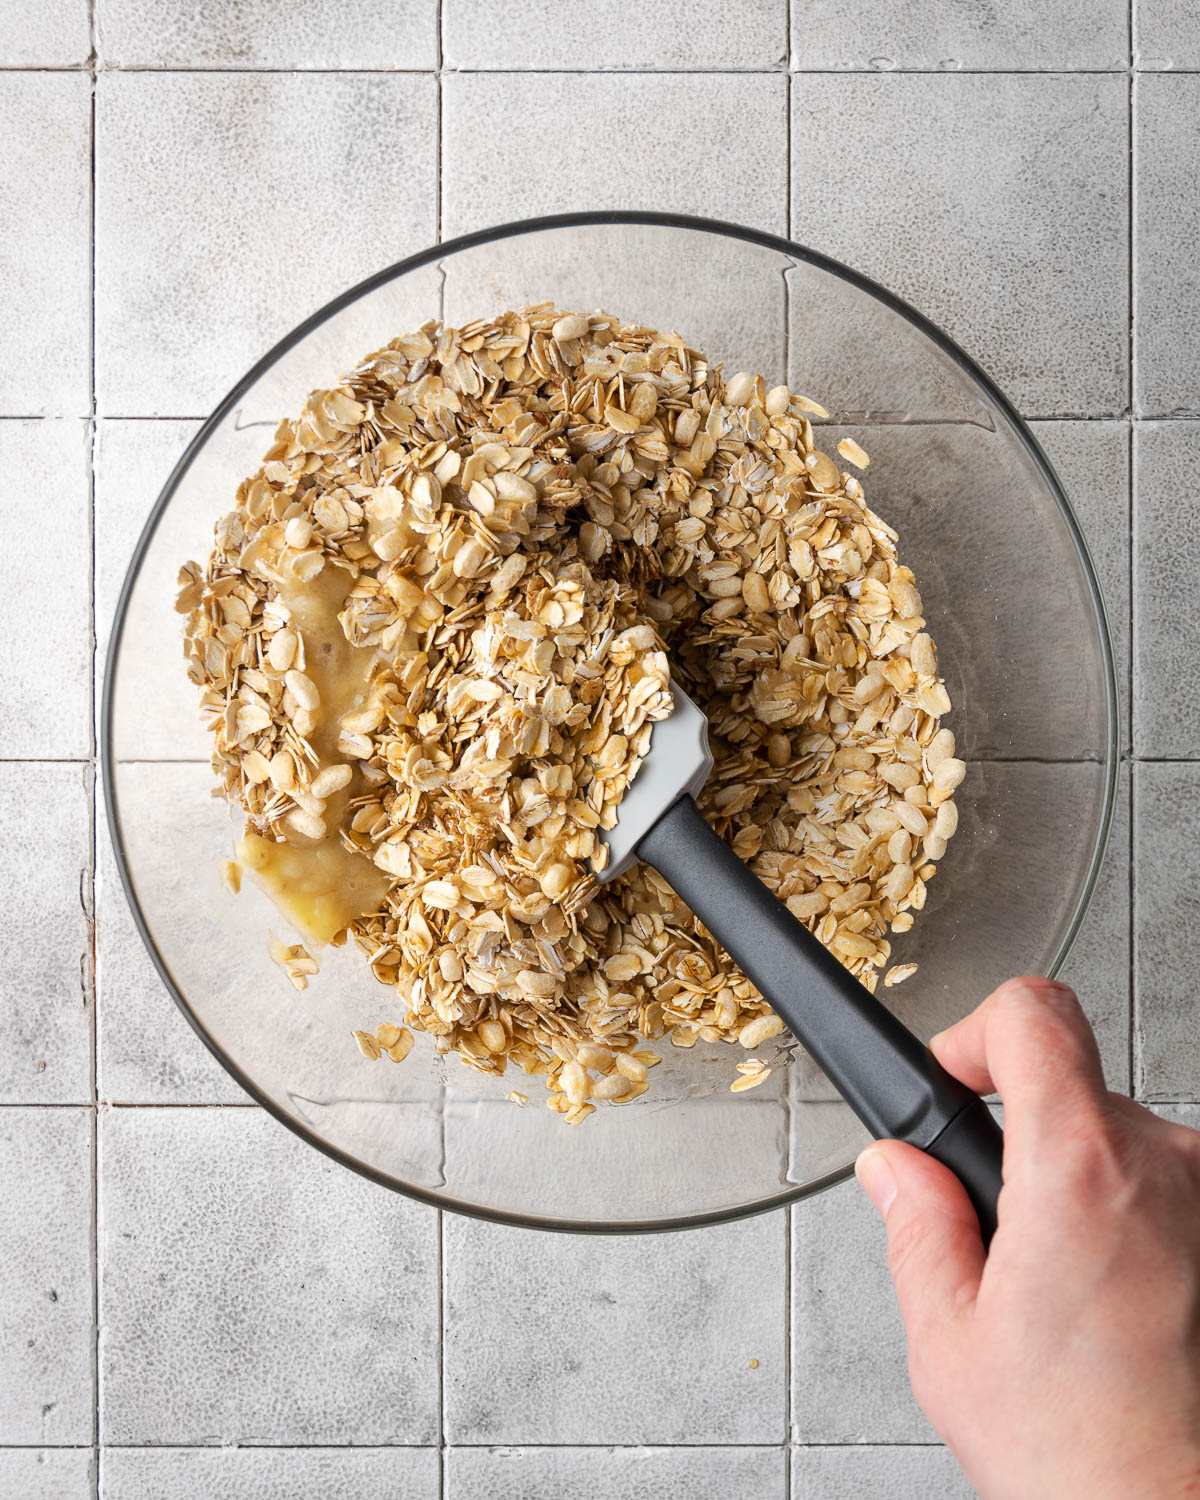 Granola being mixed together with a rubber spatula.